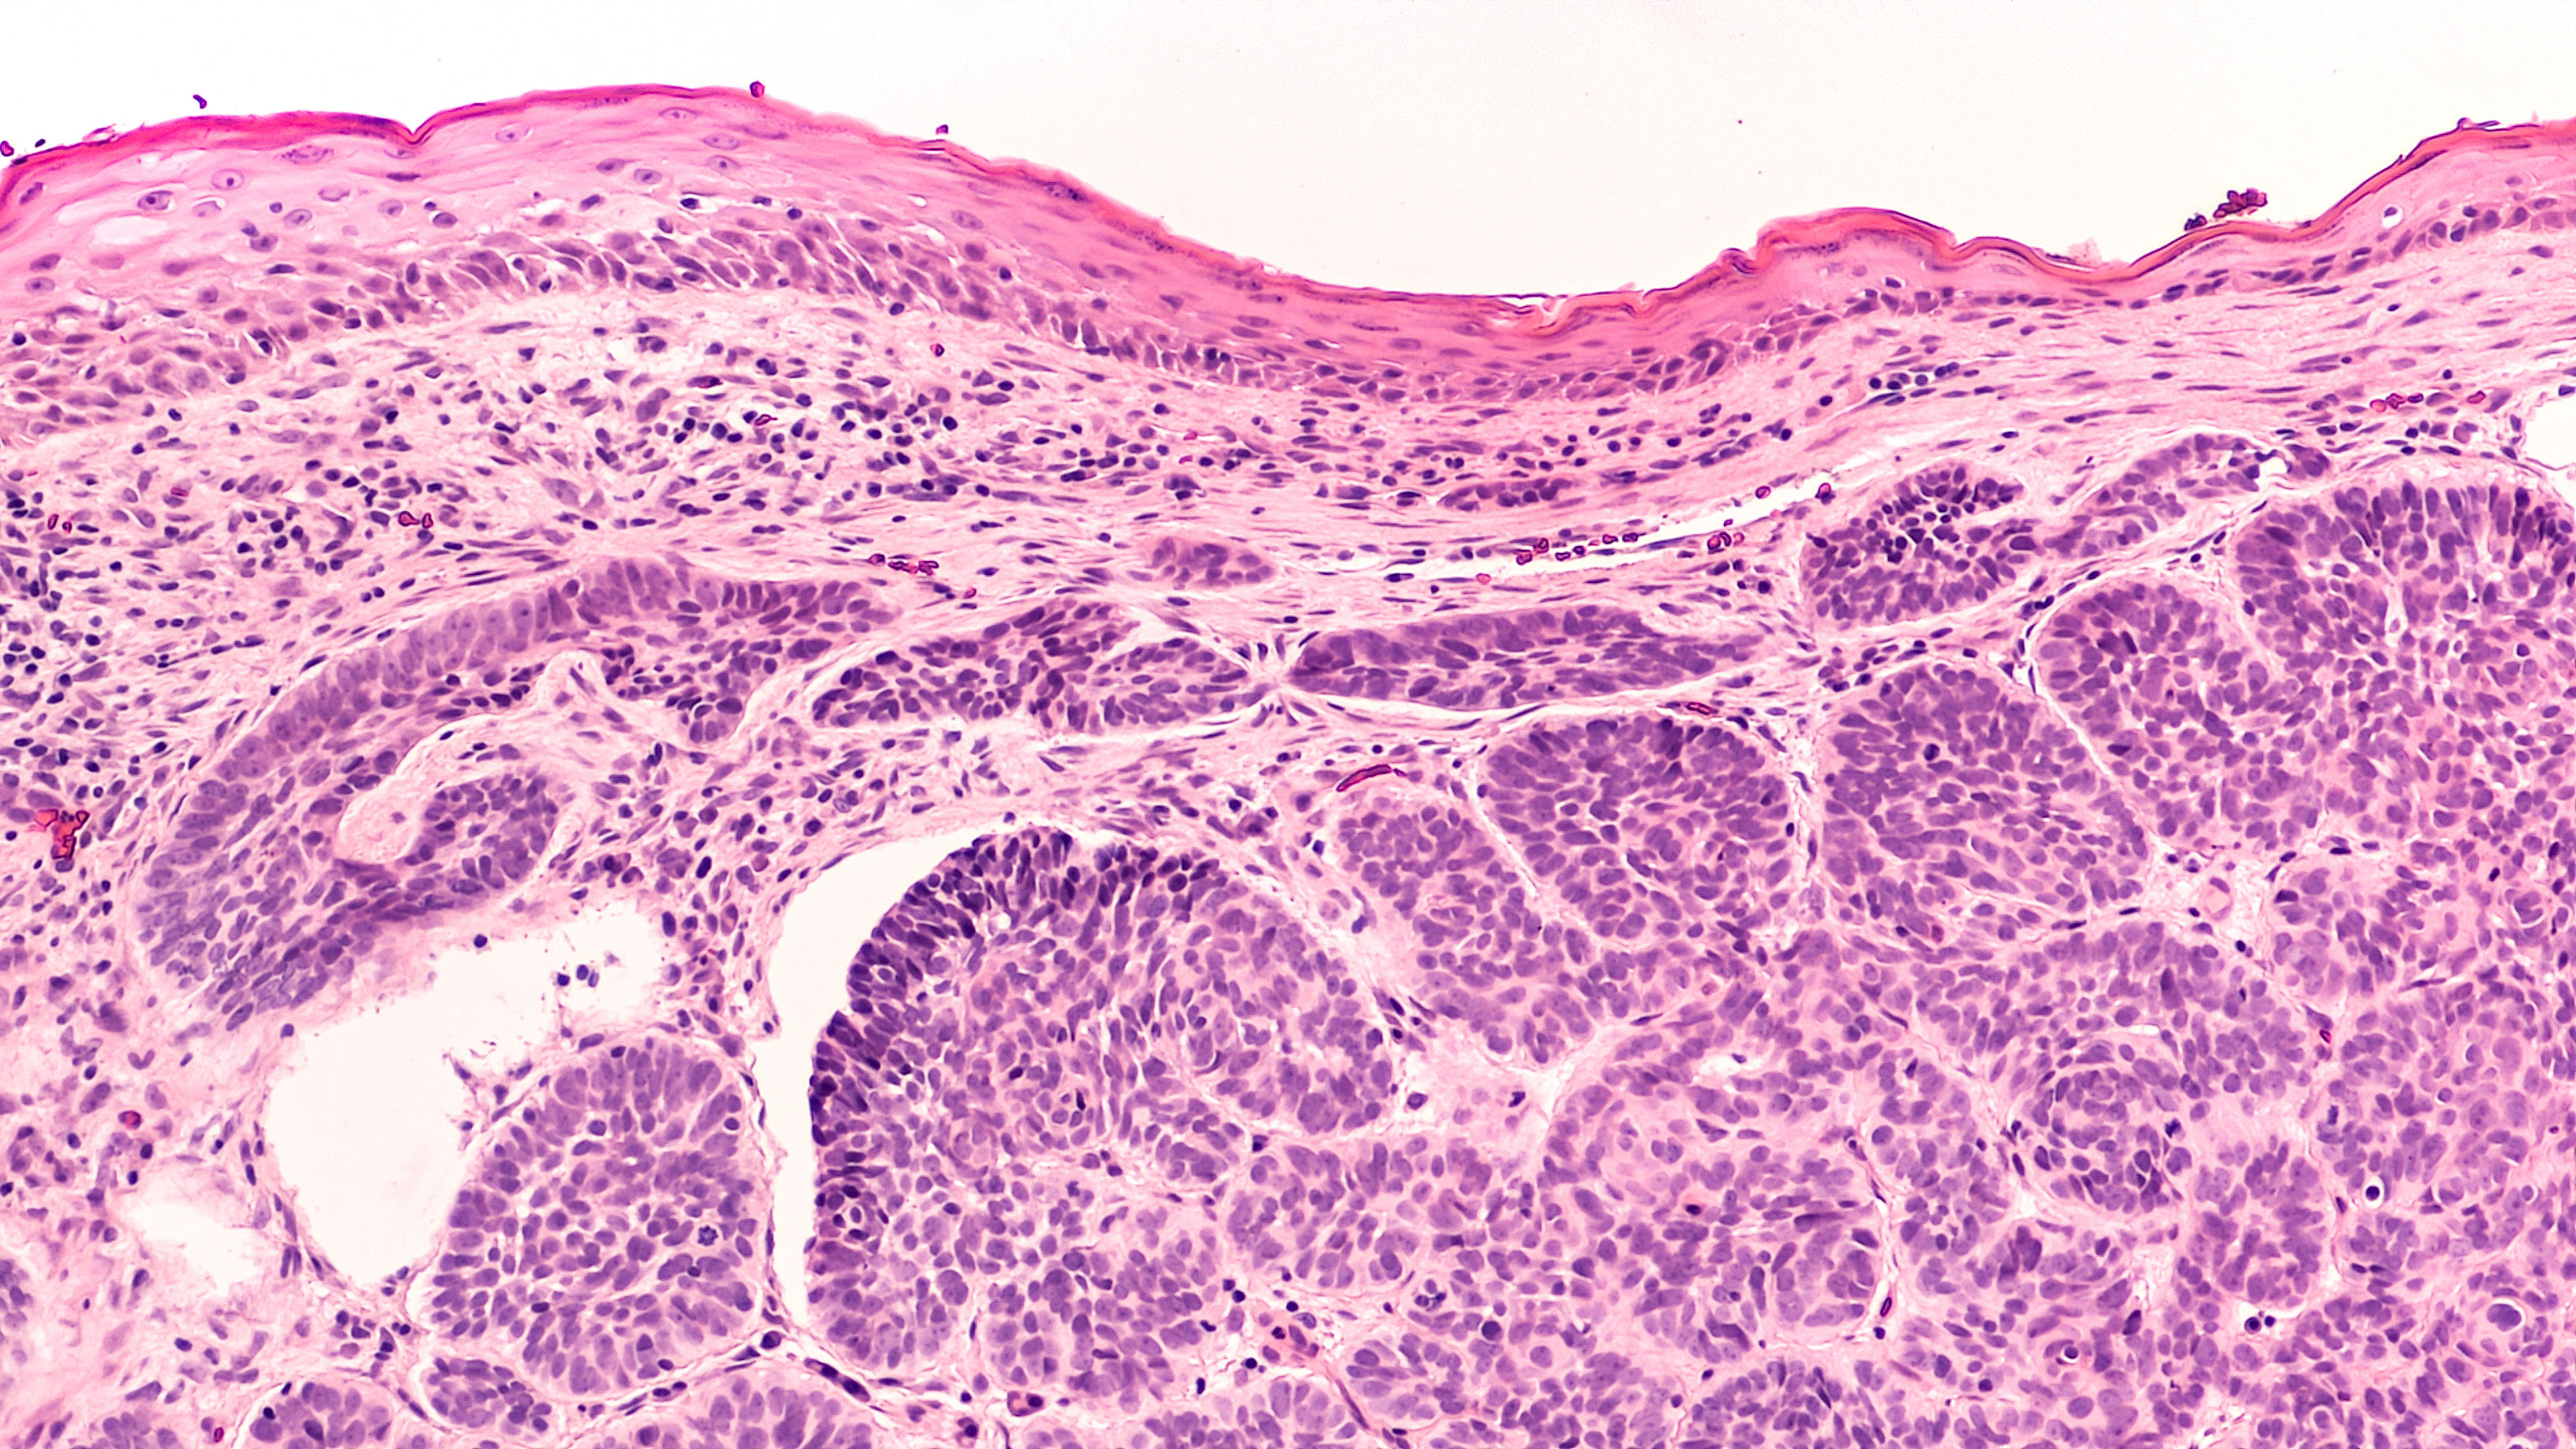 Skin biopsy pathology of basal cell carcinoma, the most most common type of sun induced skin cancer, invading the dermis and involving inked deep margin.